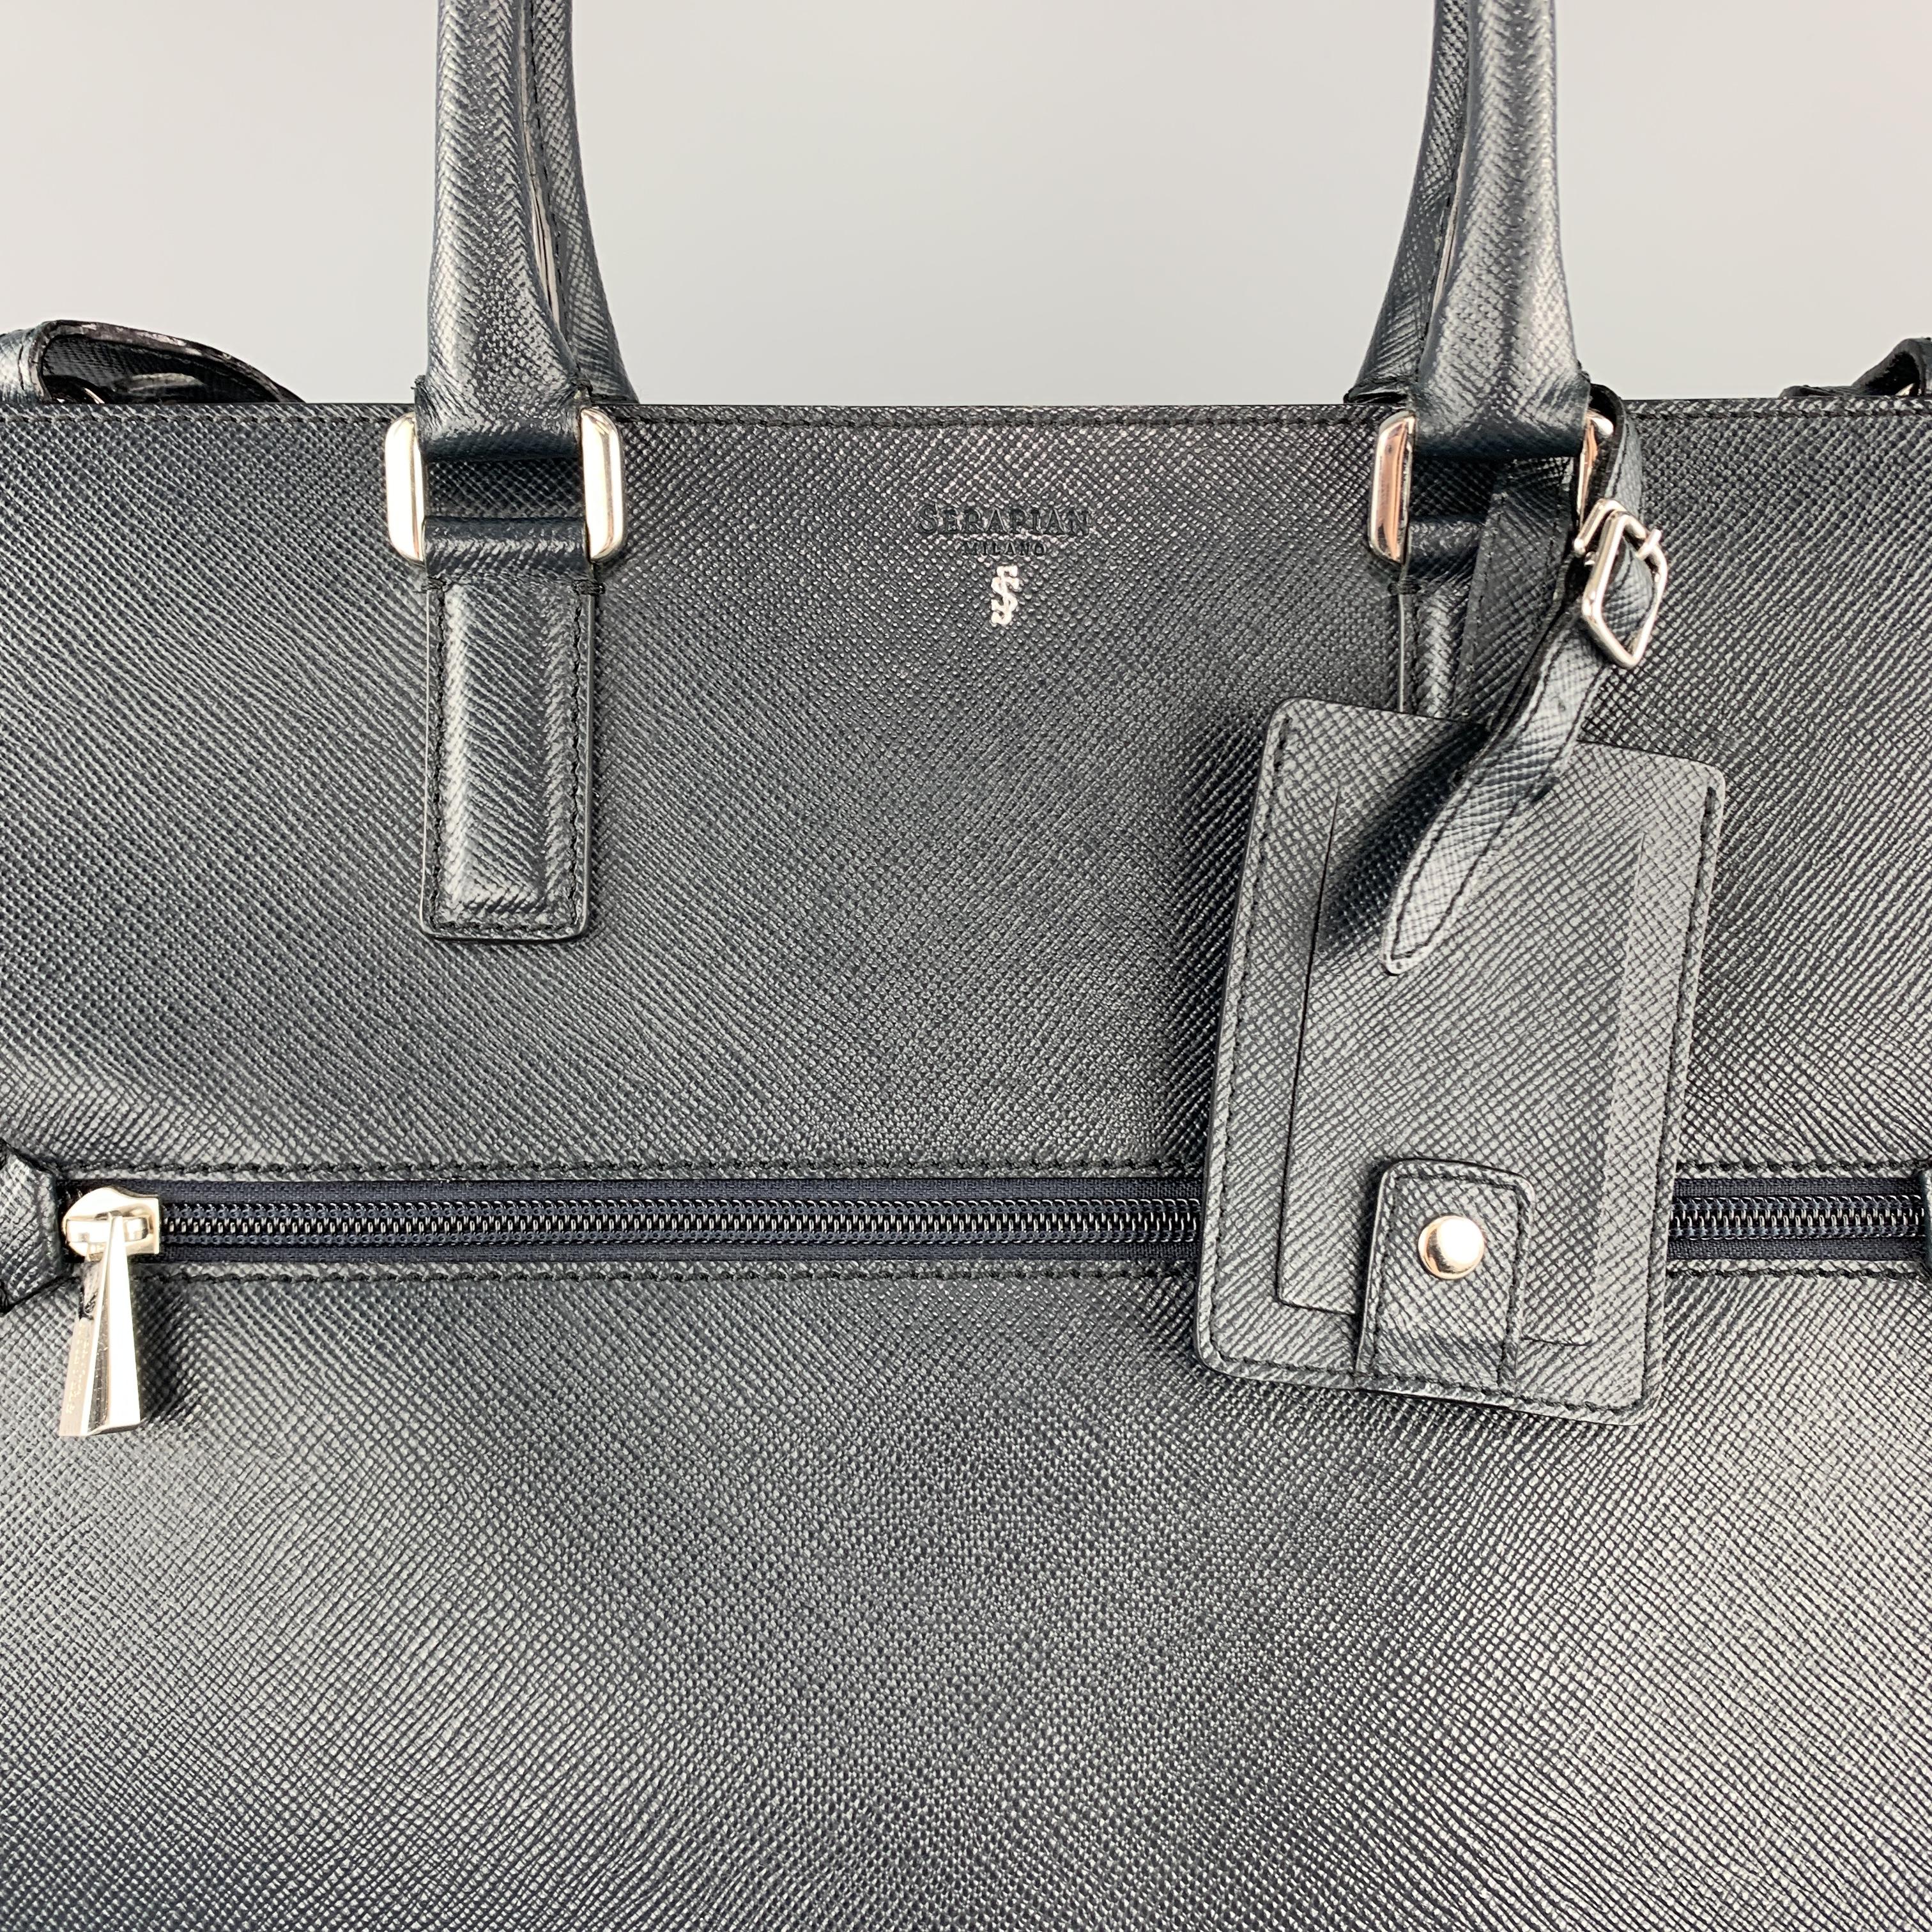 SERPIAN satchel tote bag comes in navy blue Saffiano textured leather with silver tone hardware, zip pocket, double rolled top handles, luggage tag,  top zip, detachable strap, and double compartment interior with center zip pocket divider. Minor